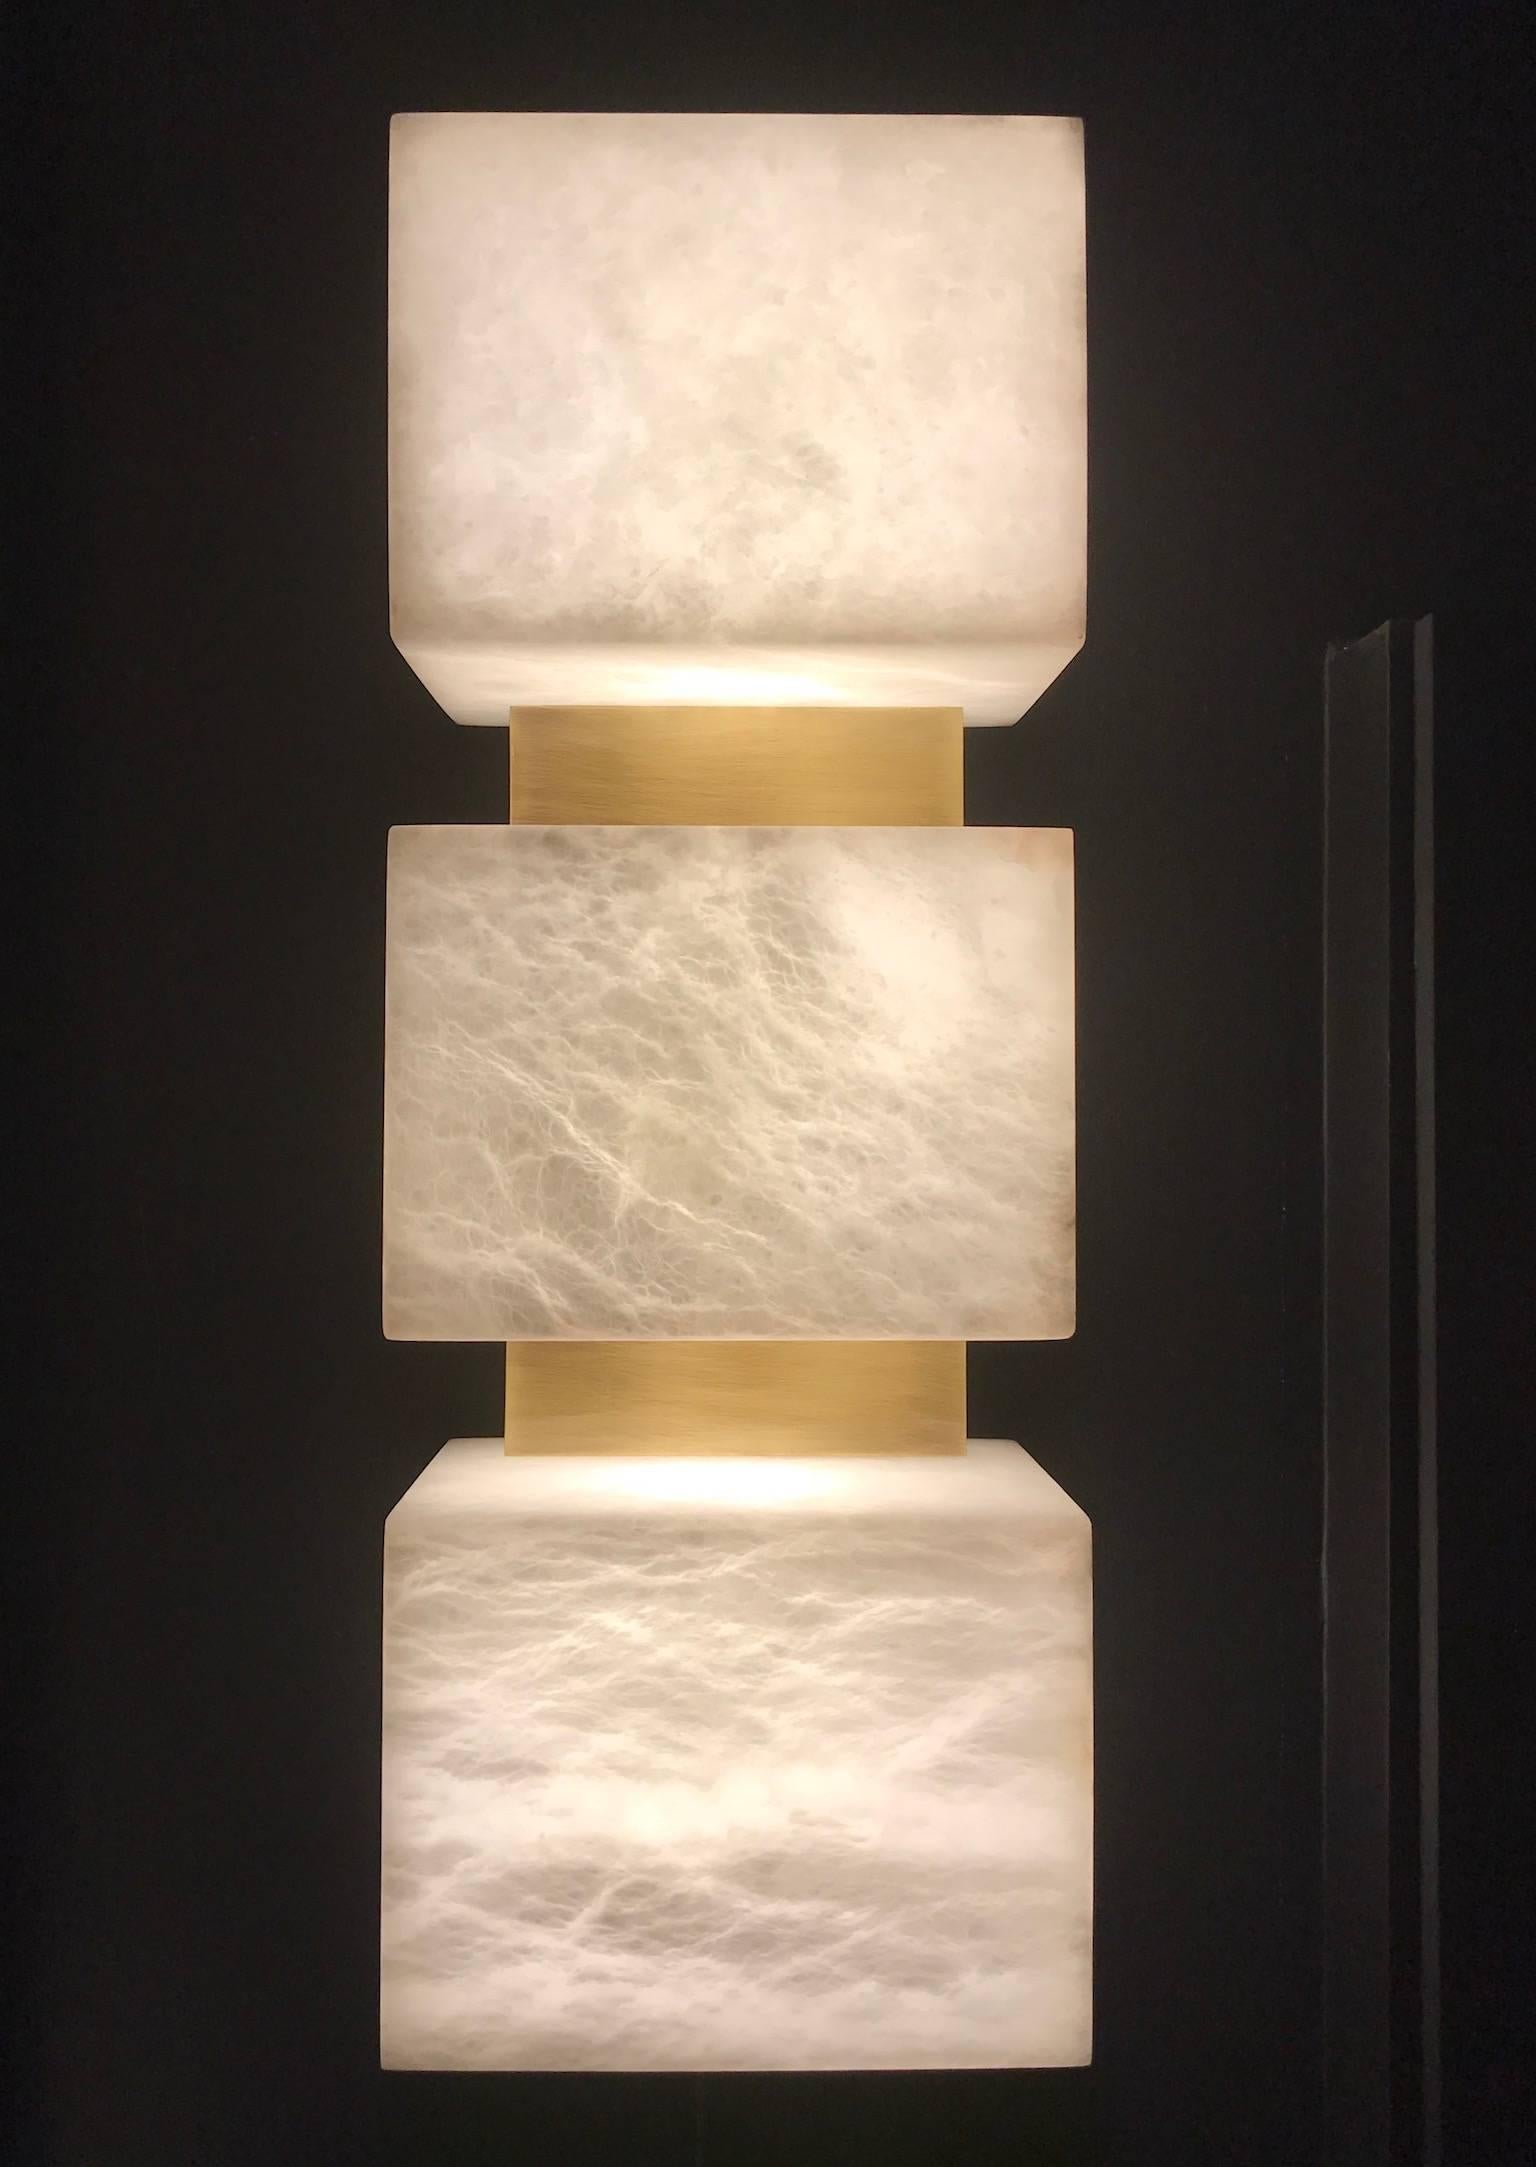 Designed by Simon Stewart for Charles Burnand the Scatola wall sconce is made from alabaster with brushed patinated brass.

Alabaster has a unique fluidity to its appearance when back lit. Being a natural material, each piece is unique. The degree